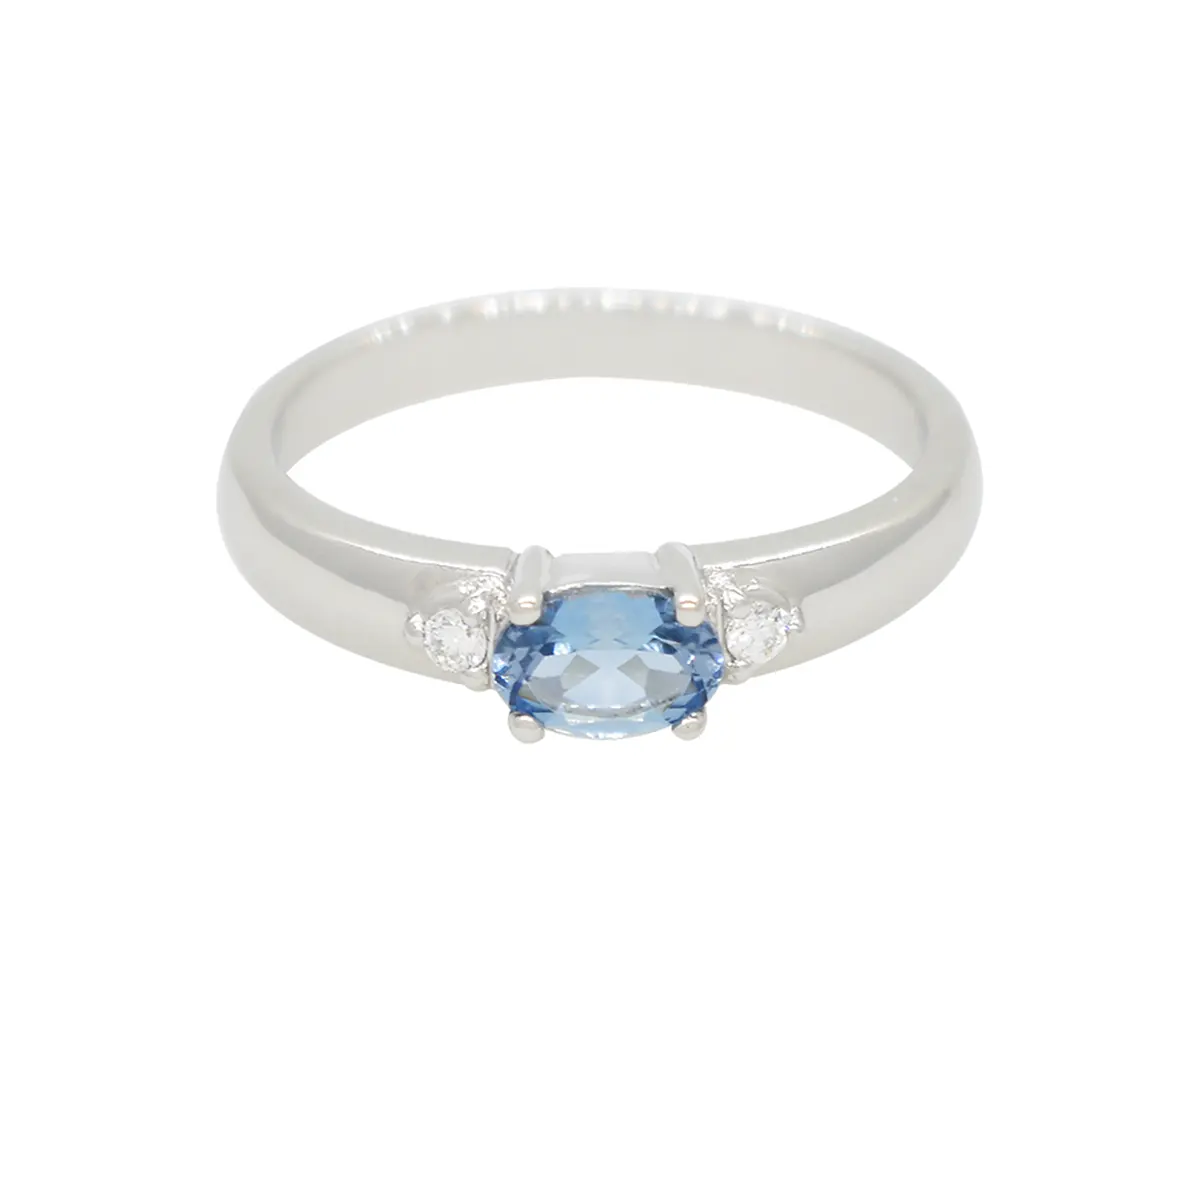 East West 3 Stones Aquamarine and Diamond Ring in 18K White Gold